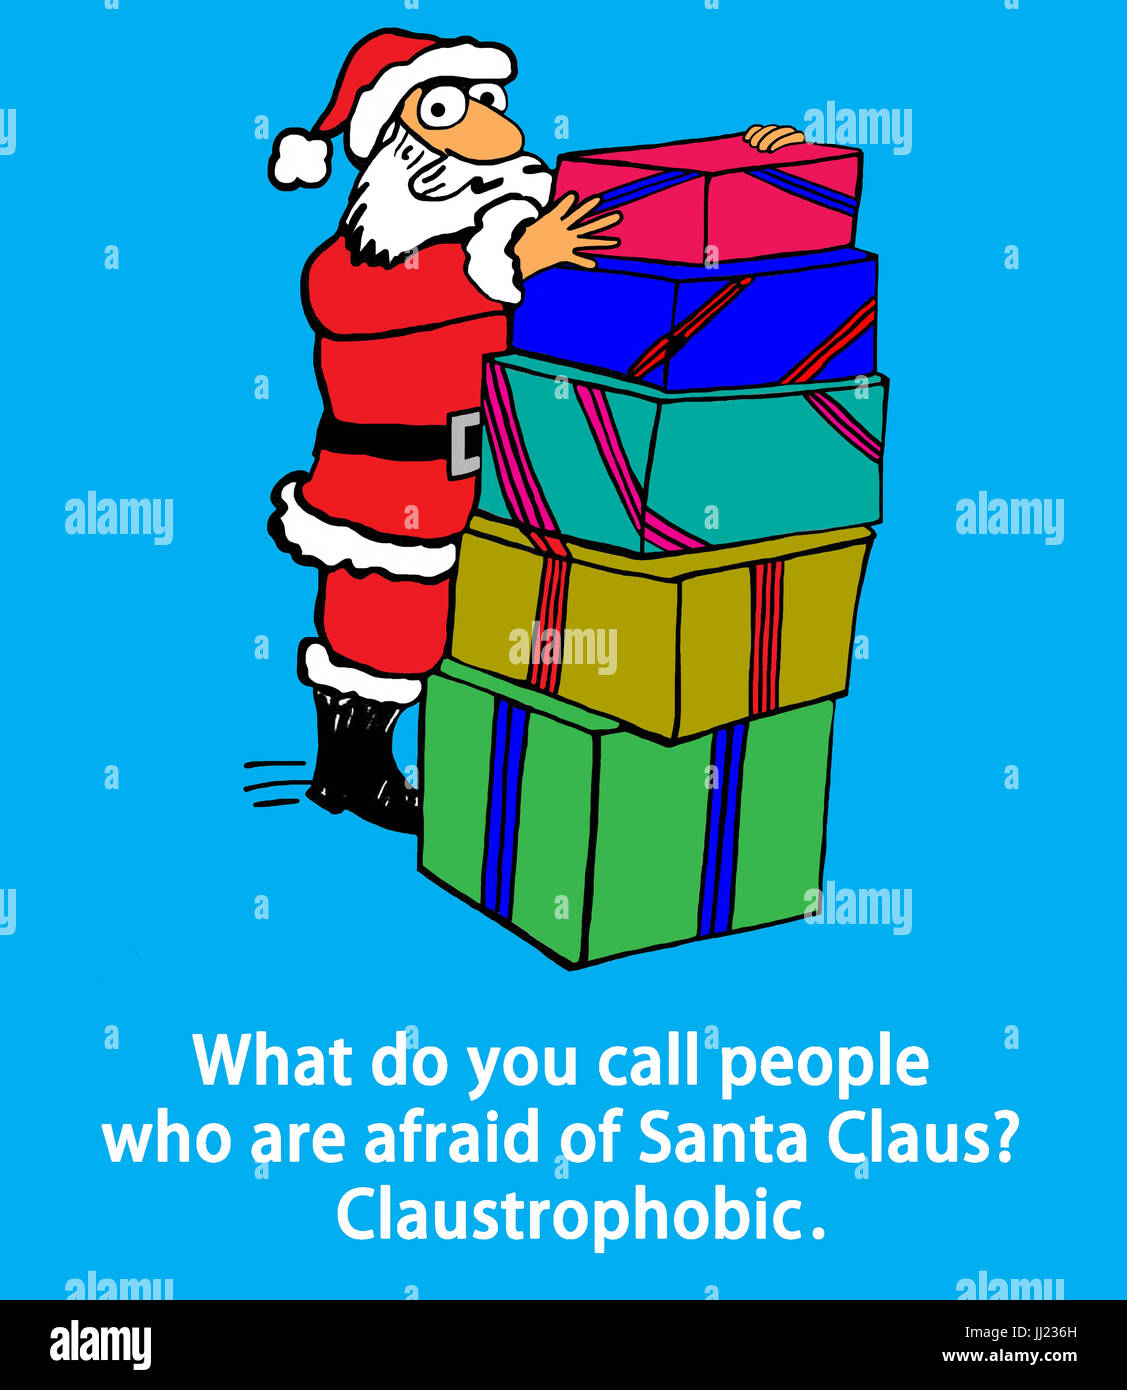 Christmas cartoon illustration of Santa Claus and a pun about those afraid of him. Stock Photo